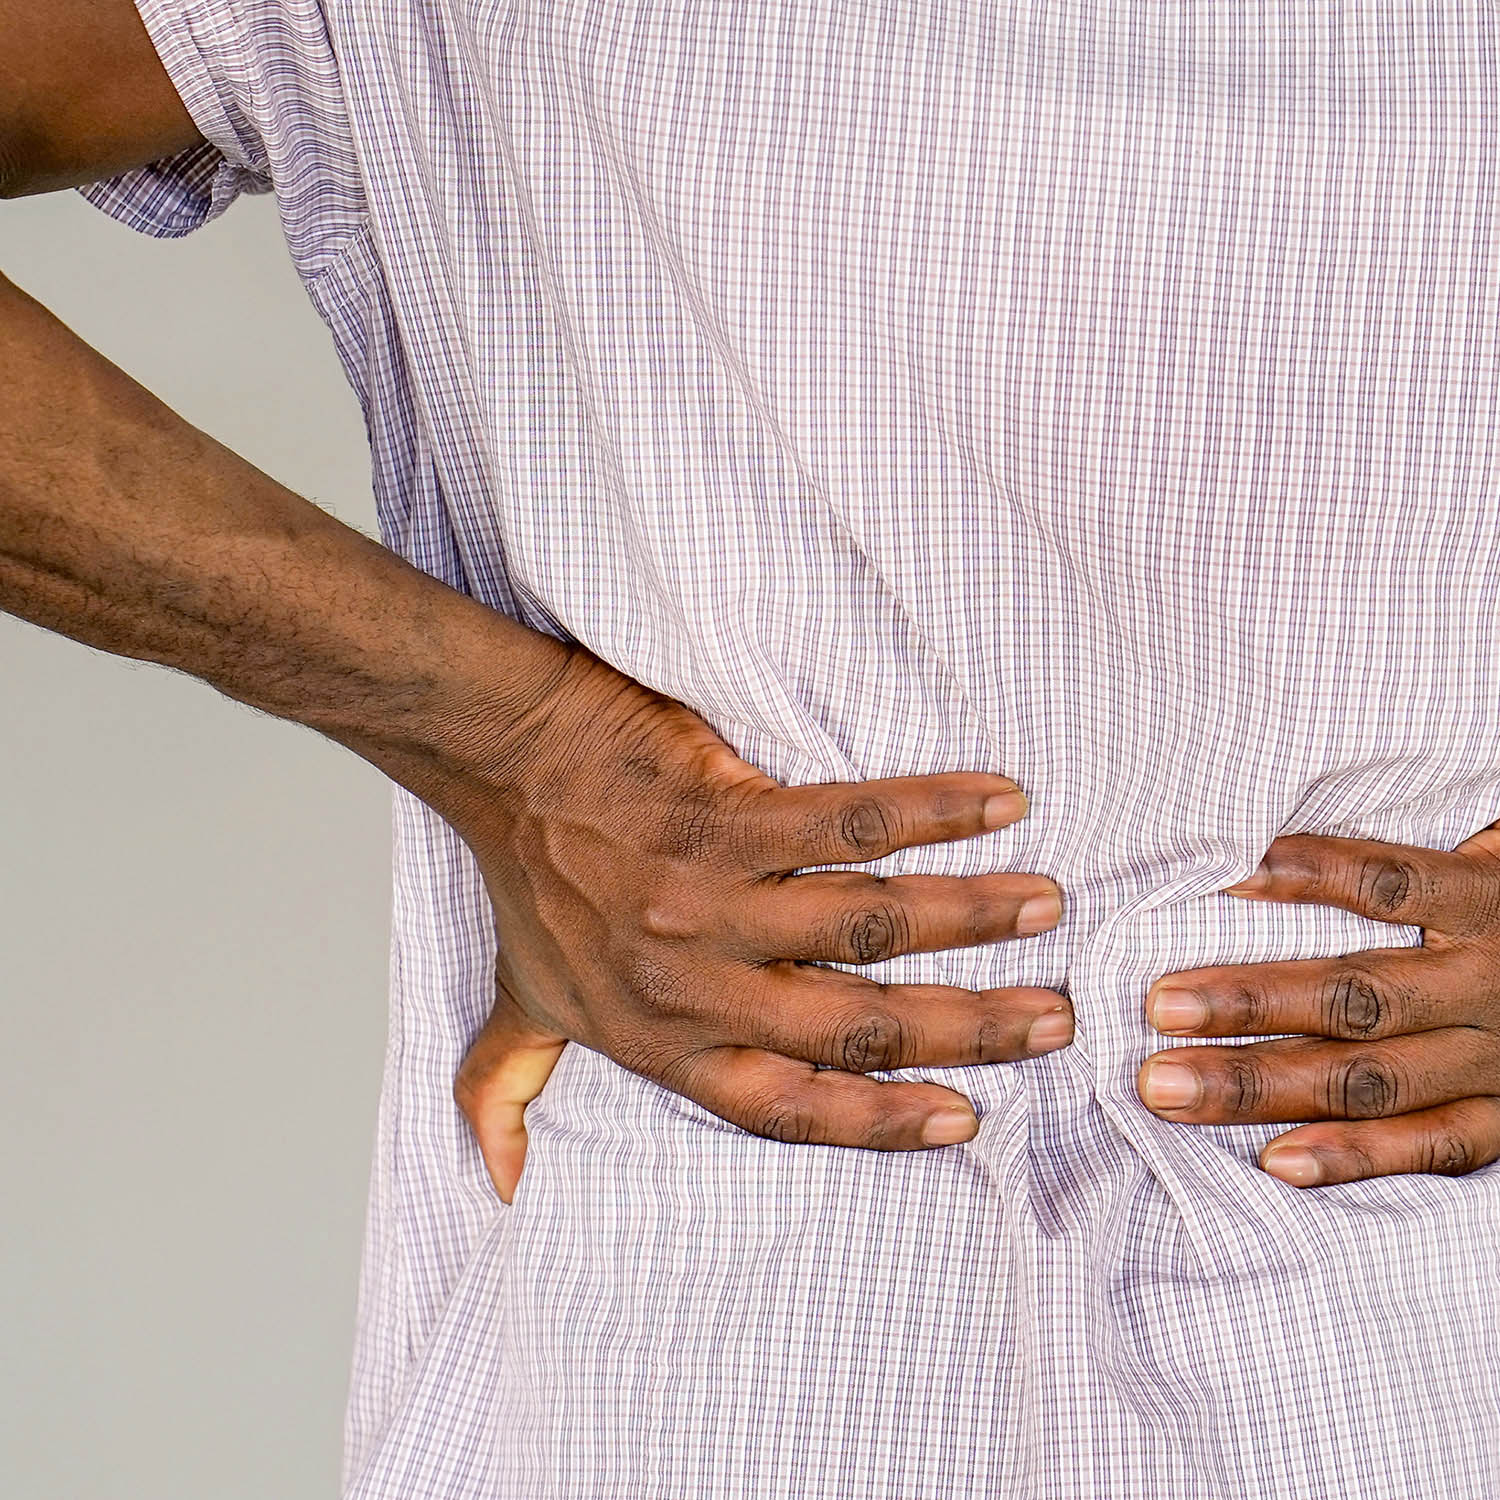 Low-Back Pain and Complementary Health Approaches: What You Need To Know